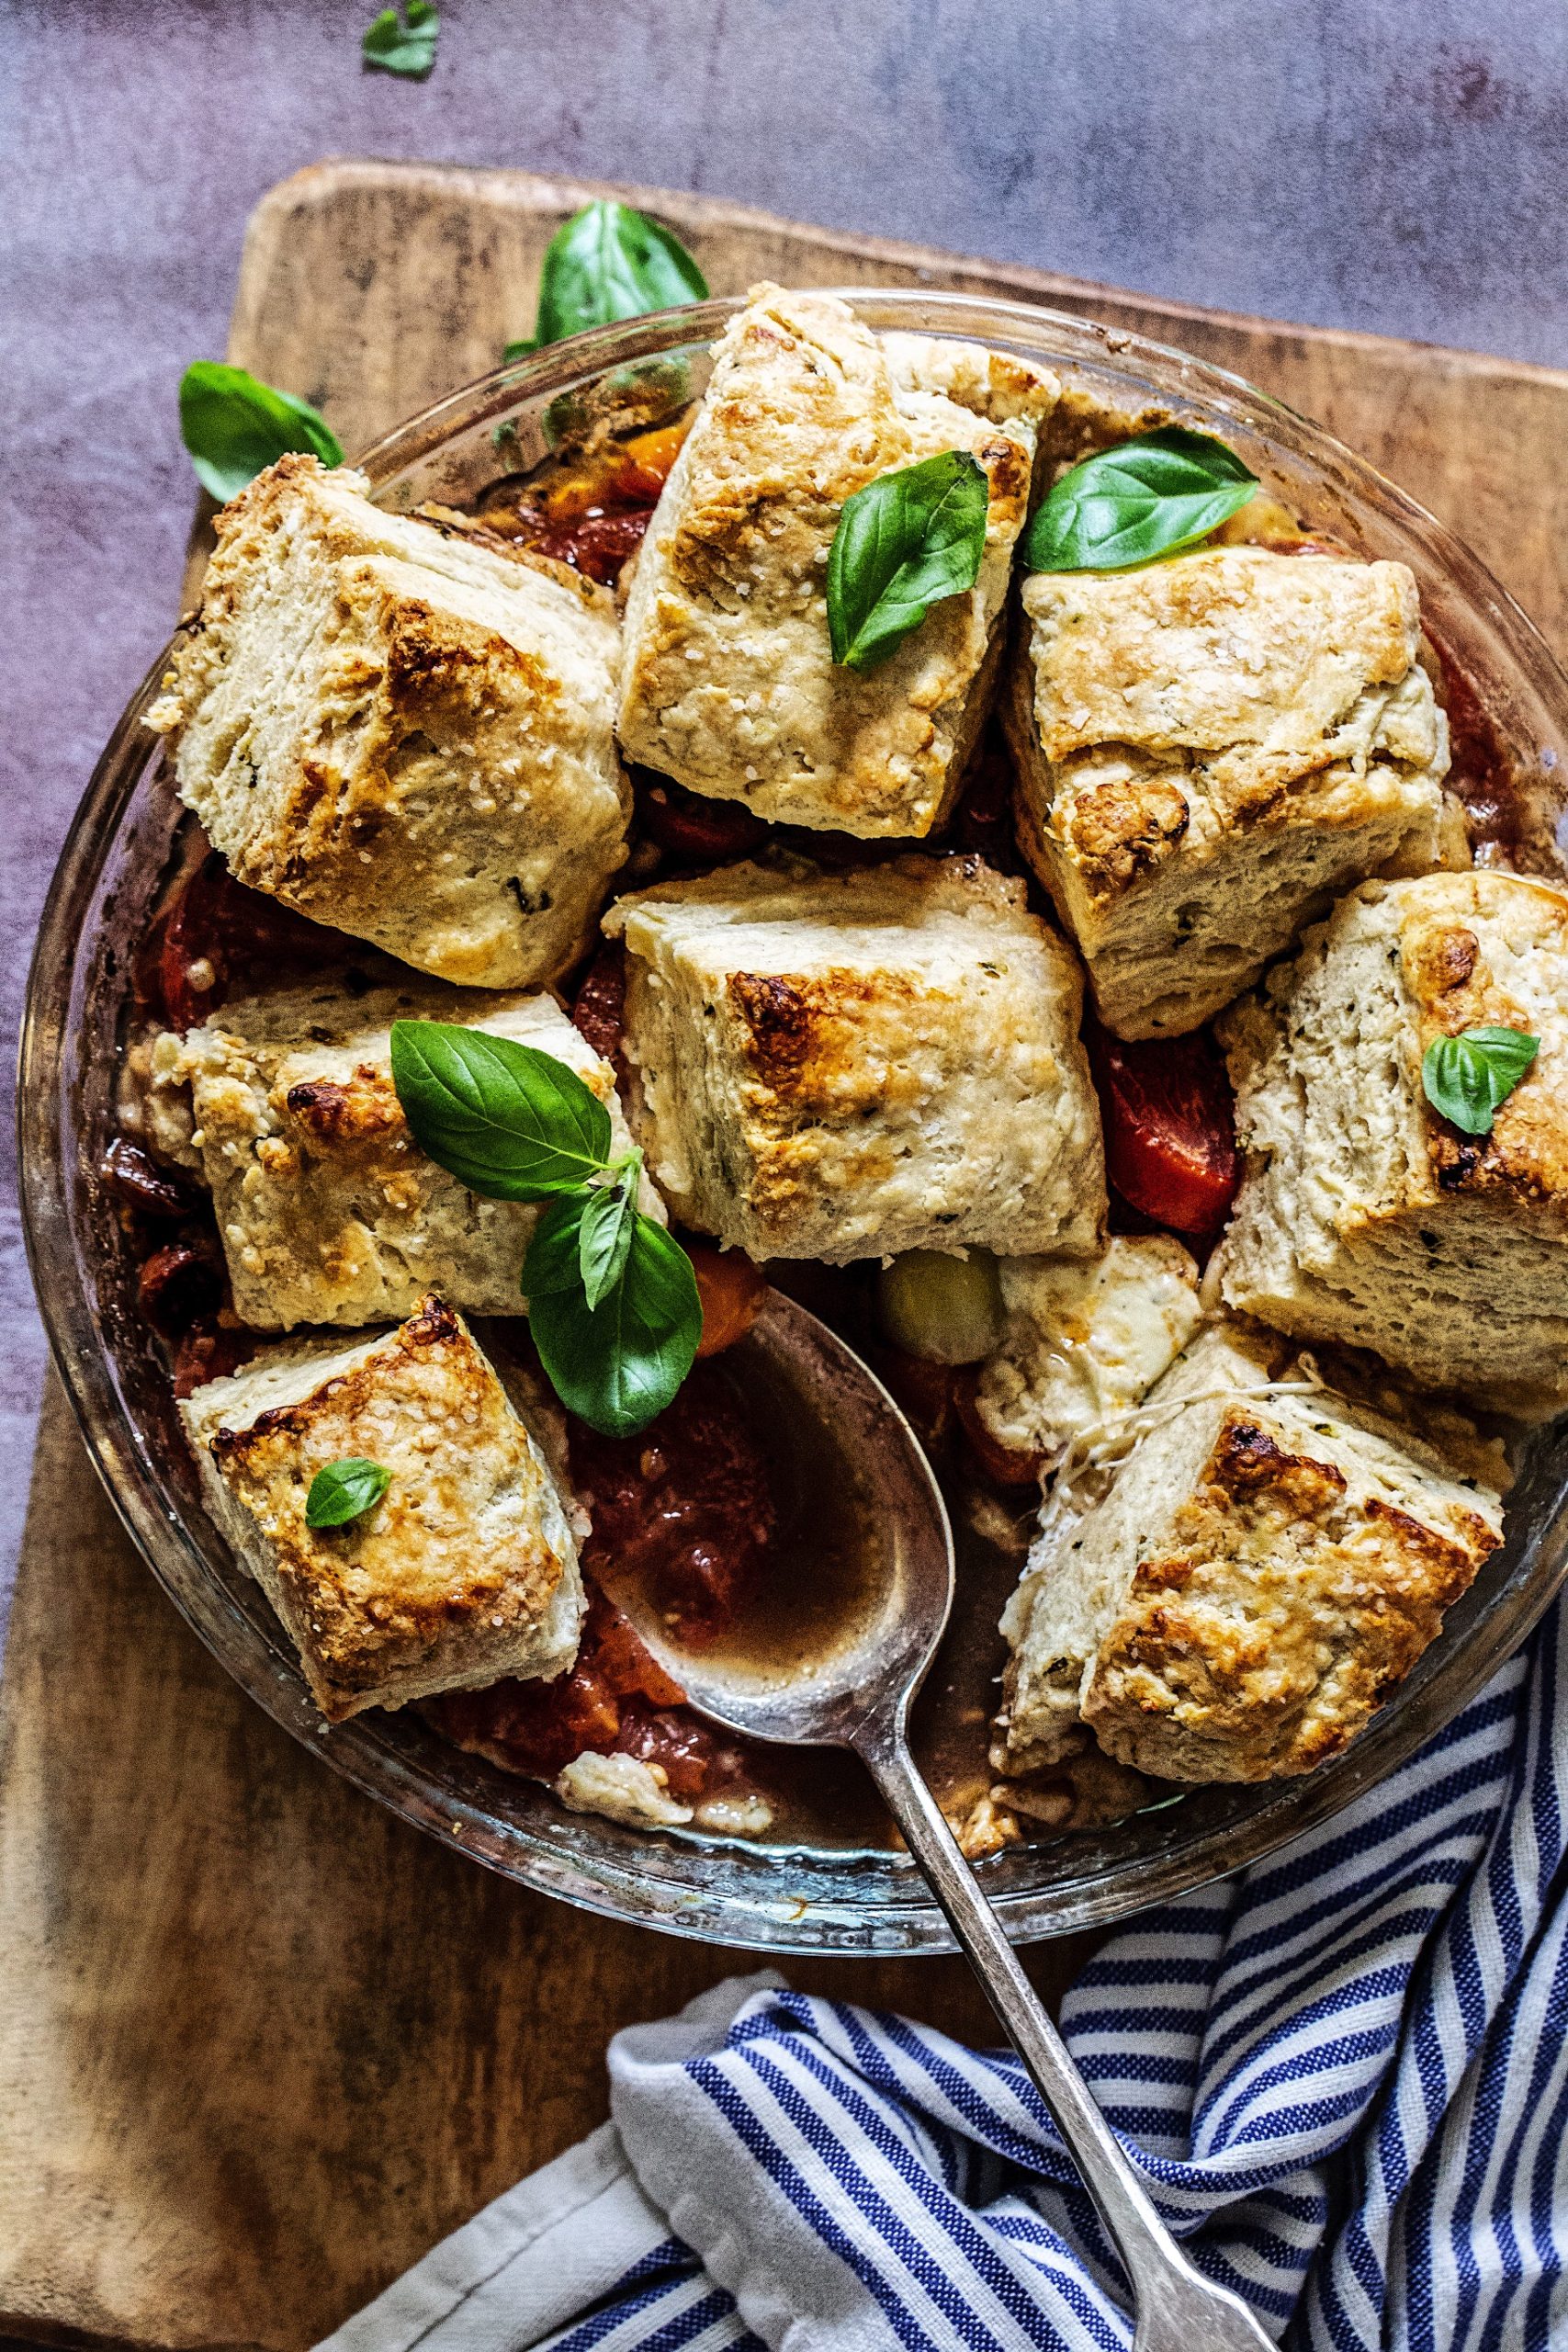 Juicy Tomato & Mozzarella Cobbler with Basil Butter Biscuits